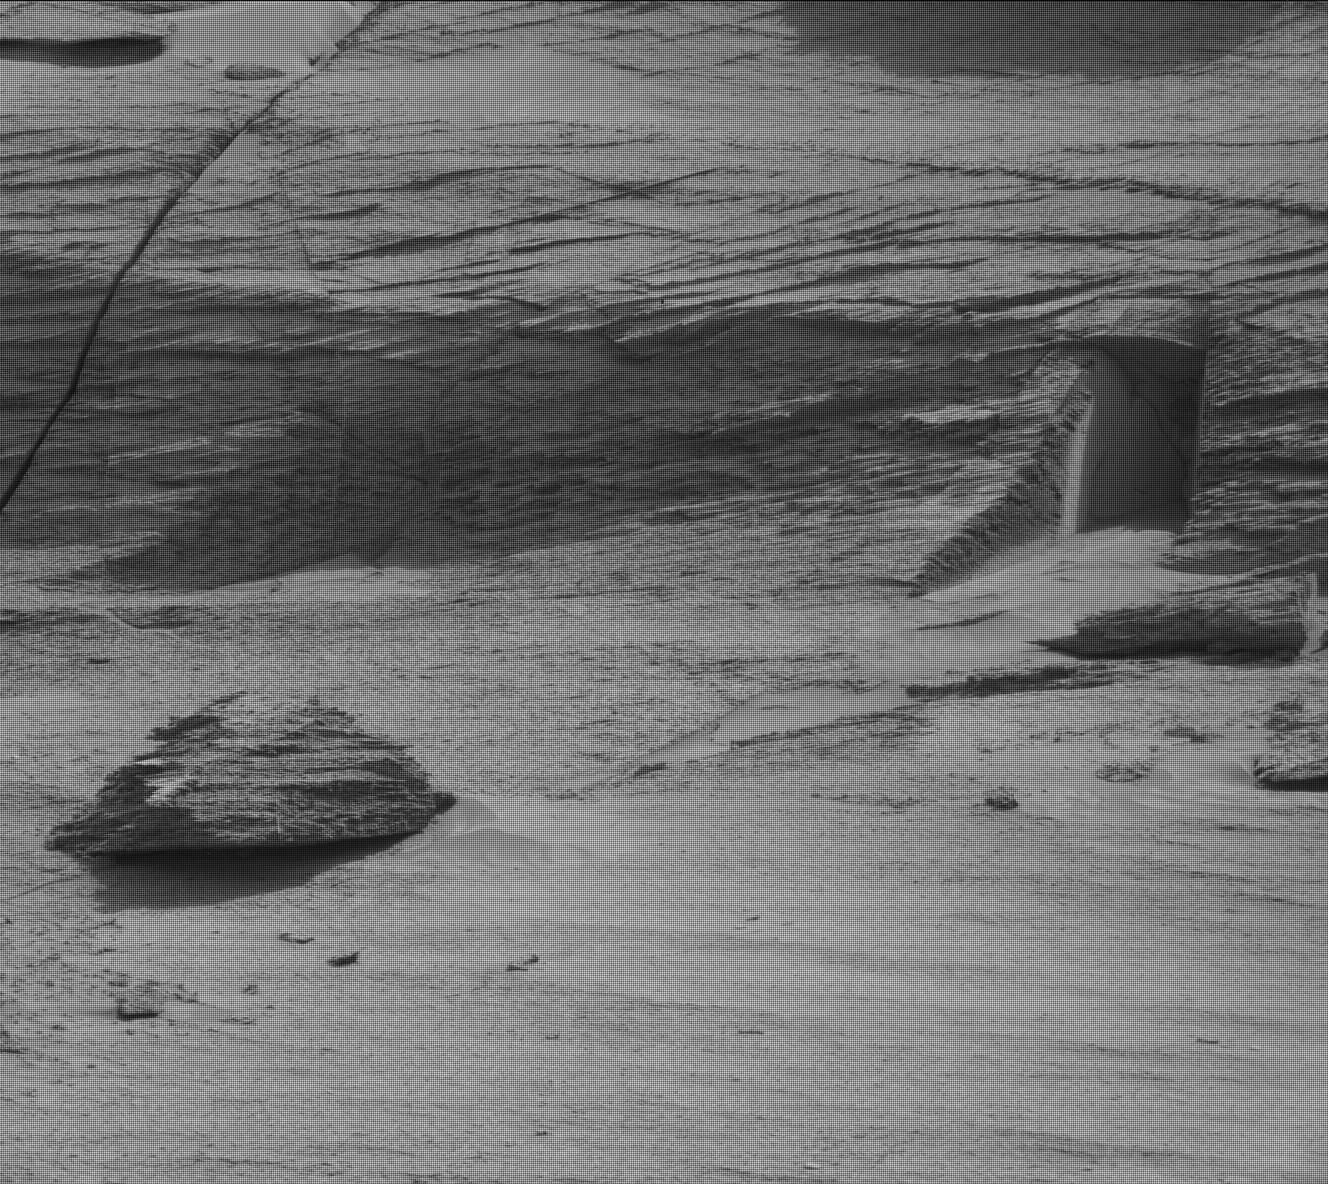 'Doorway' on Mars: NASA Curiosity Rover Finds Something ODD in the Red Planet